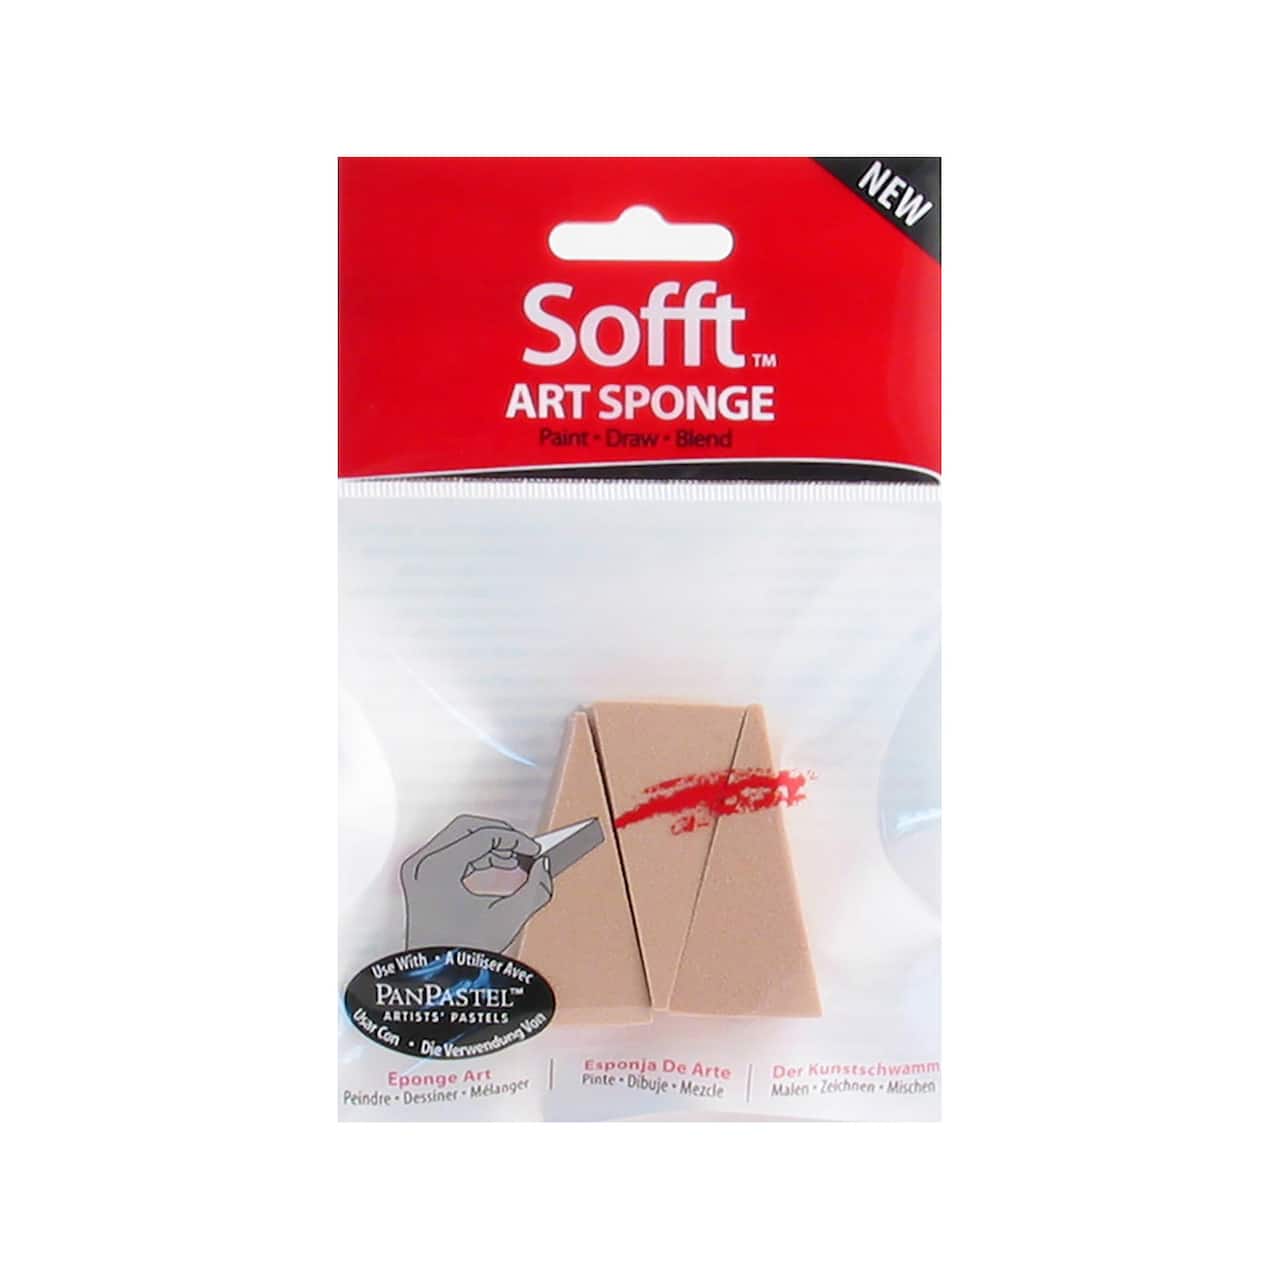 Colorfin Sofft™ Wedge Art Sponges, 3ct.